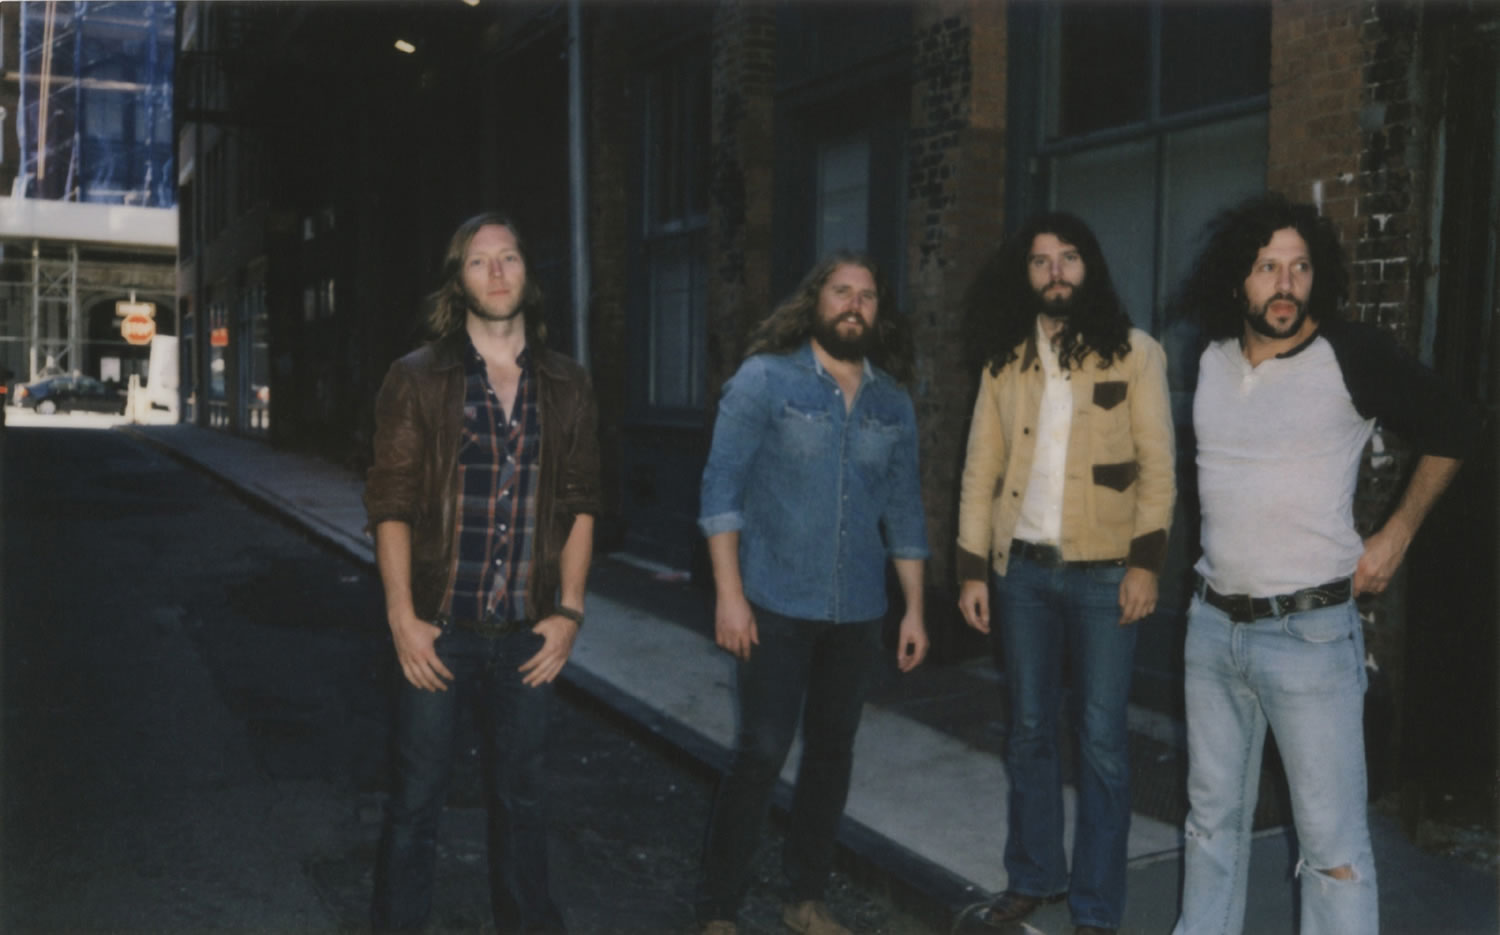 Canadian rock band The Sheepdogs will perform Oct.